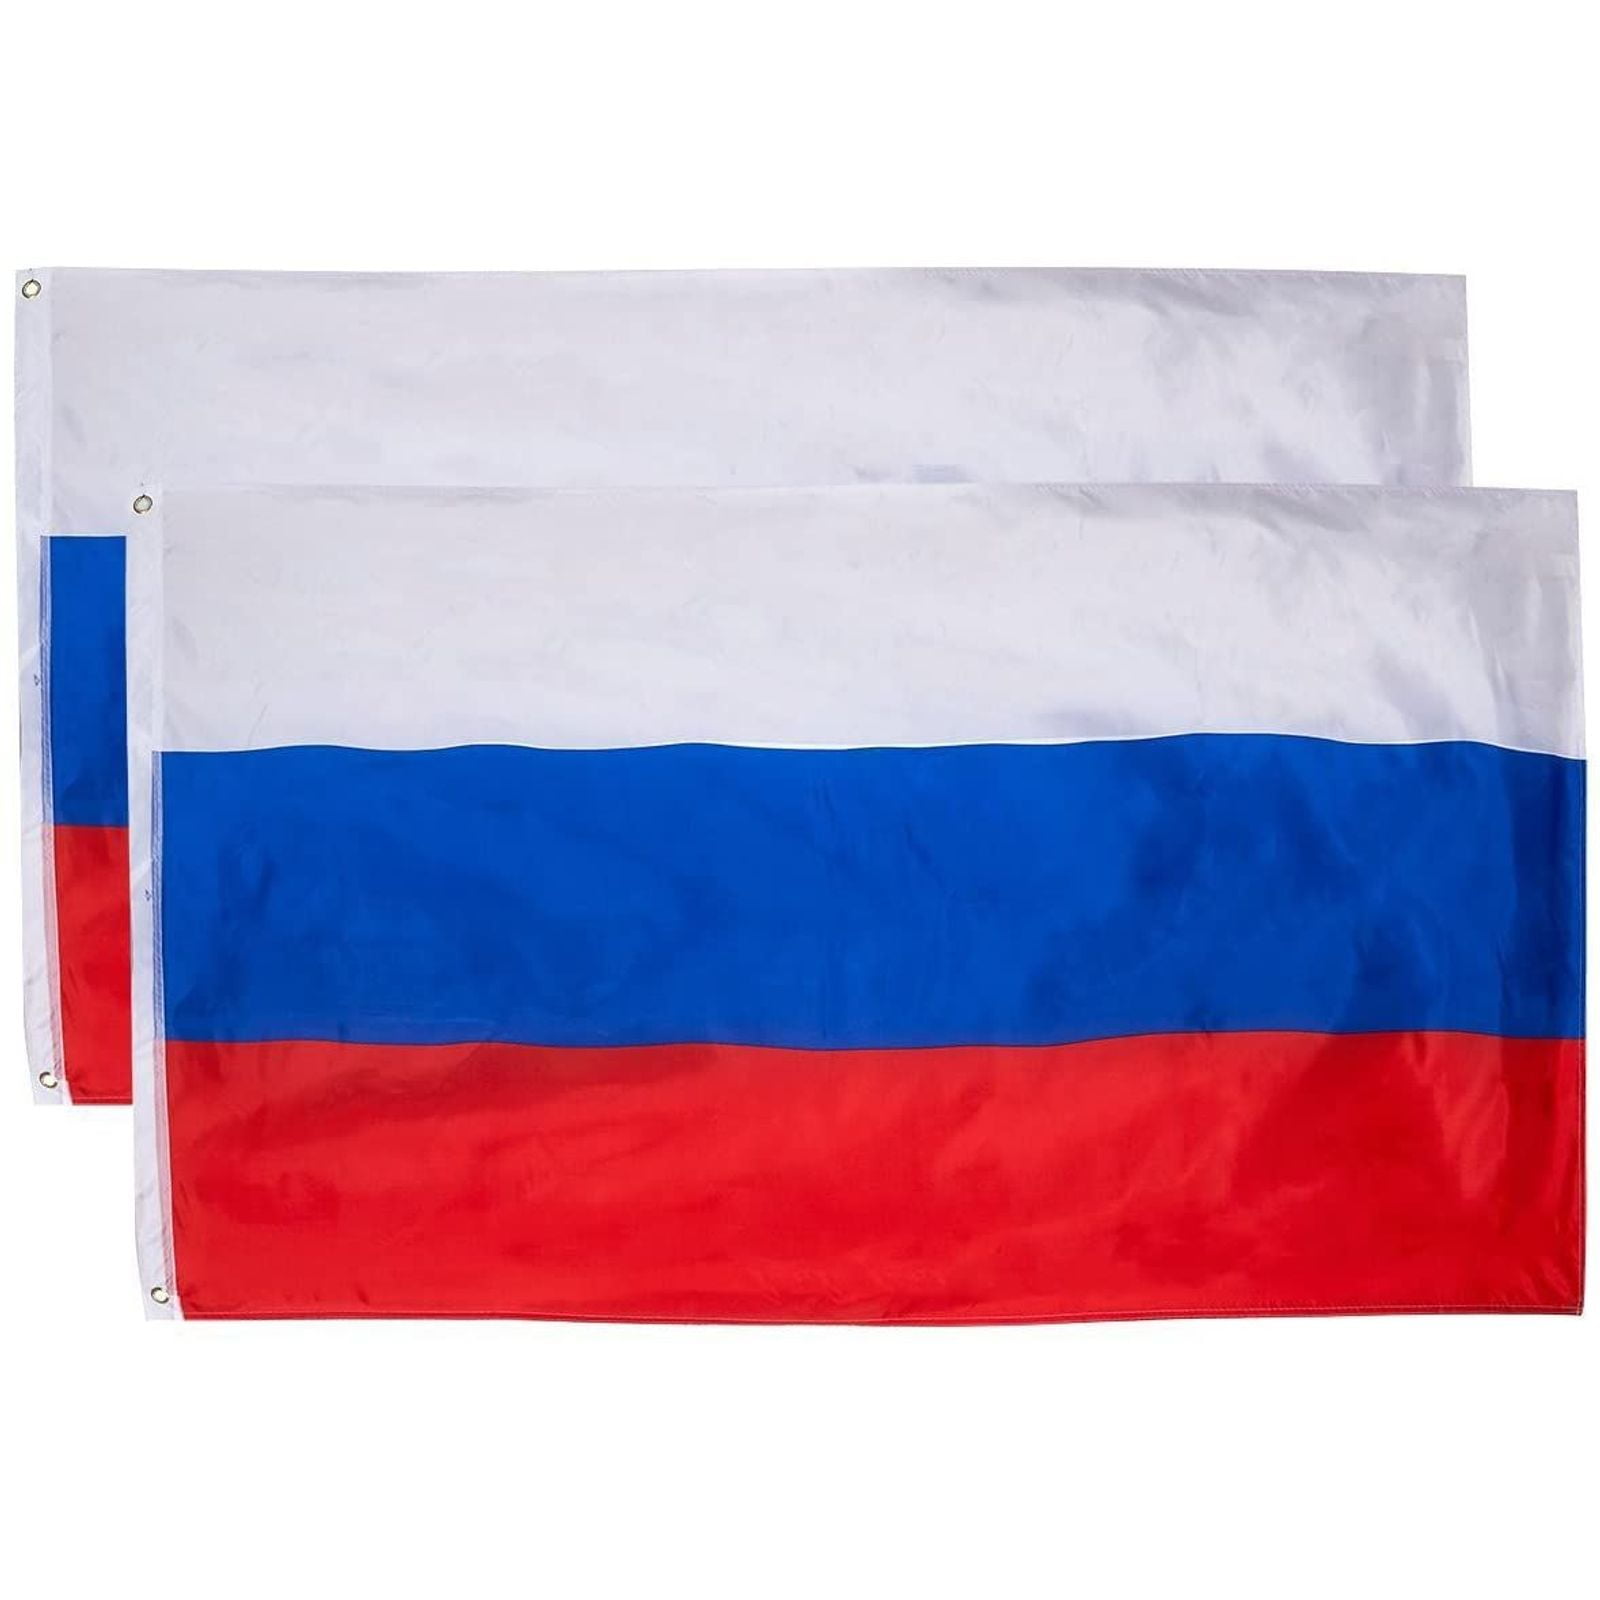 Russia FLAG 3x5 FT National Country Banner Polyester With Grommets RUSSIAN NEW 